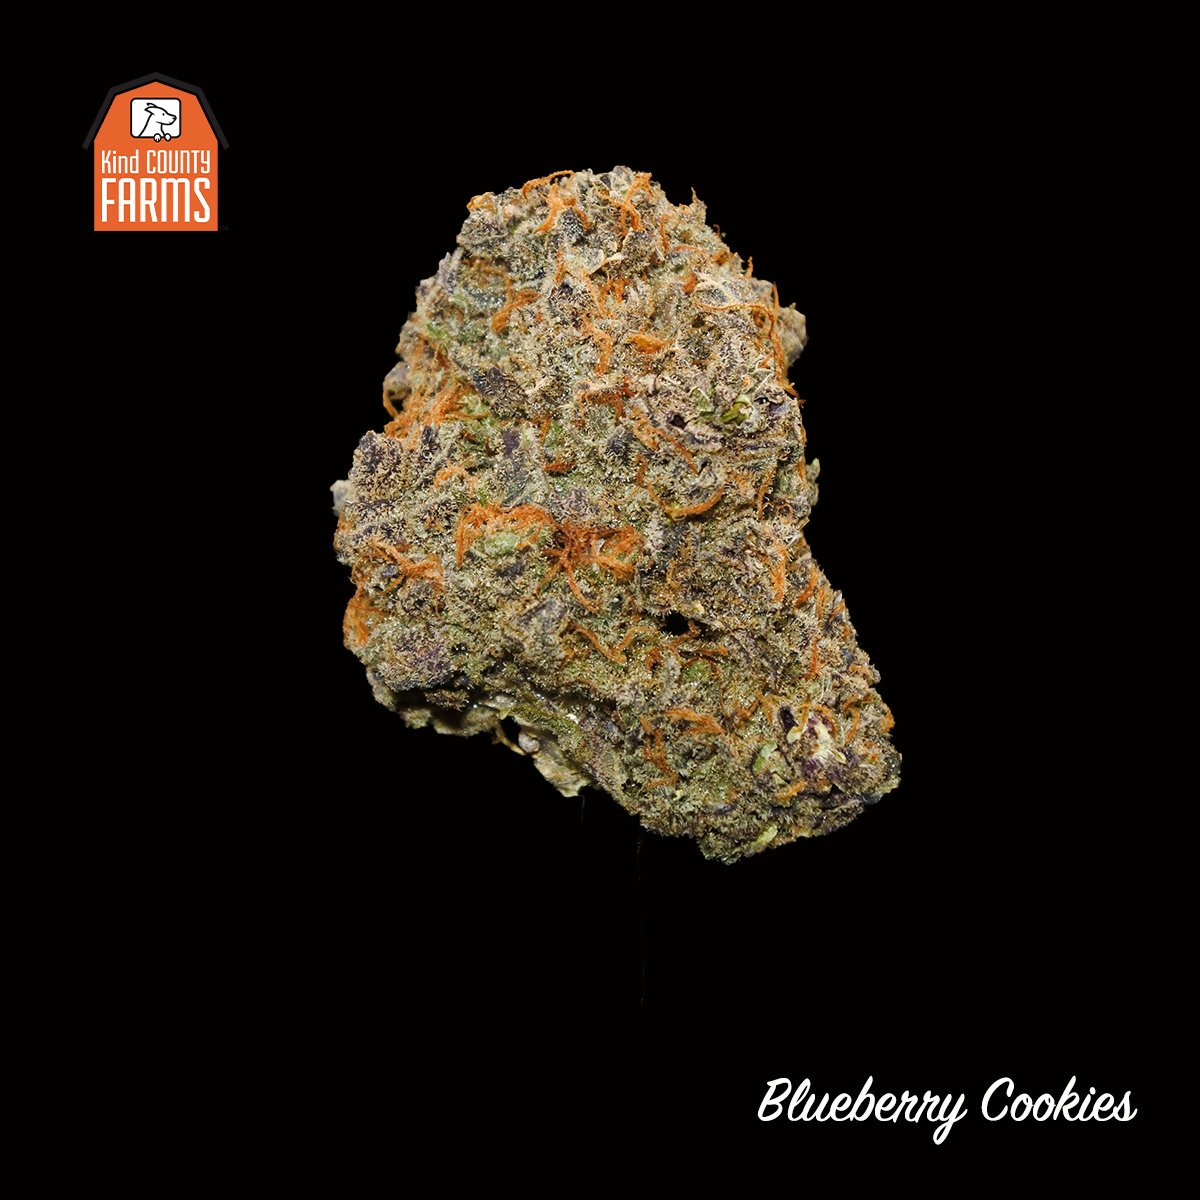 Blueberry Cookies // Summer 2019
.
#UnwindWithKind
.
.
.
.
.
#cannabis #sfcannabis #trybasa #hightimes #bananaog #dosidos #cannabisculture #stoned #highsociety #stonernation #igerssf #igsanfrancisco #nowrongwaysf #sf_insta #richmonddistrict #missiondistrict #dogpatch #missionbay